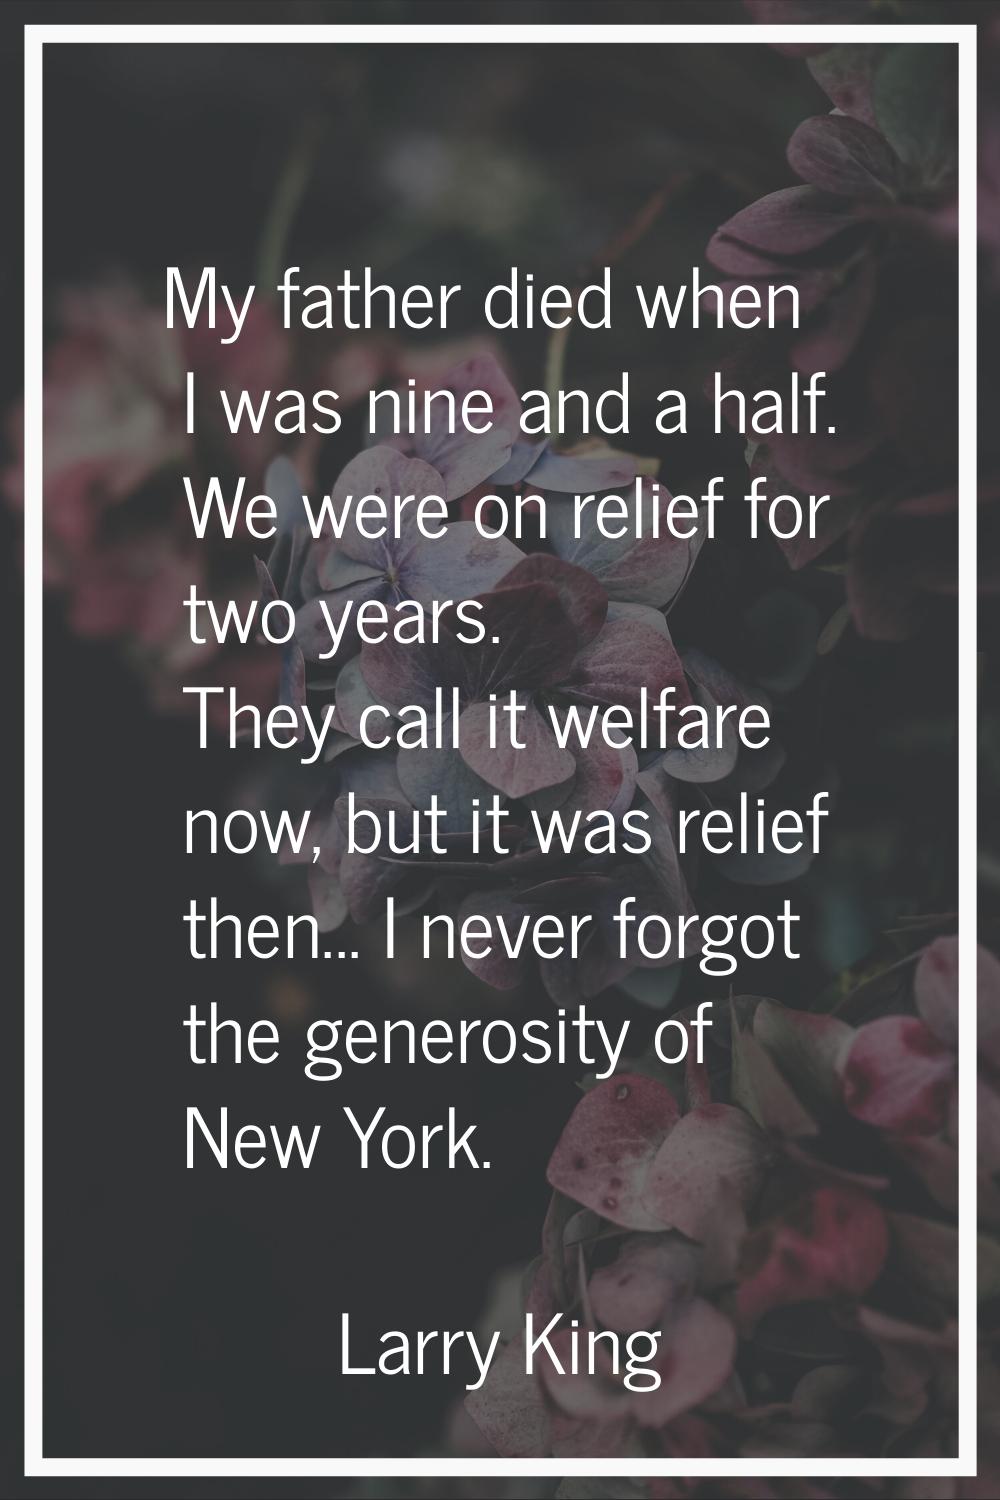 My father died when I was nine and a half. We were on relief for two years. They call it welfare no